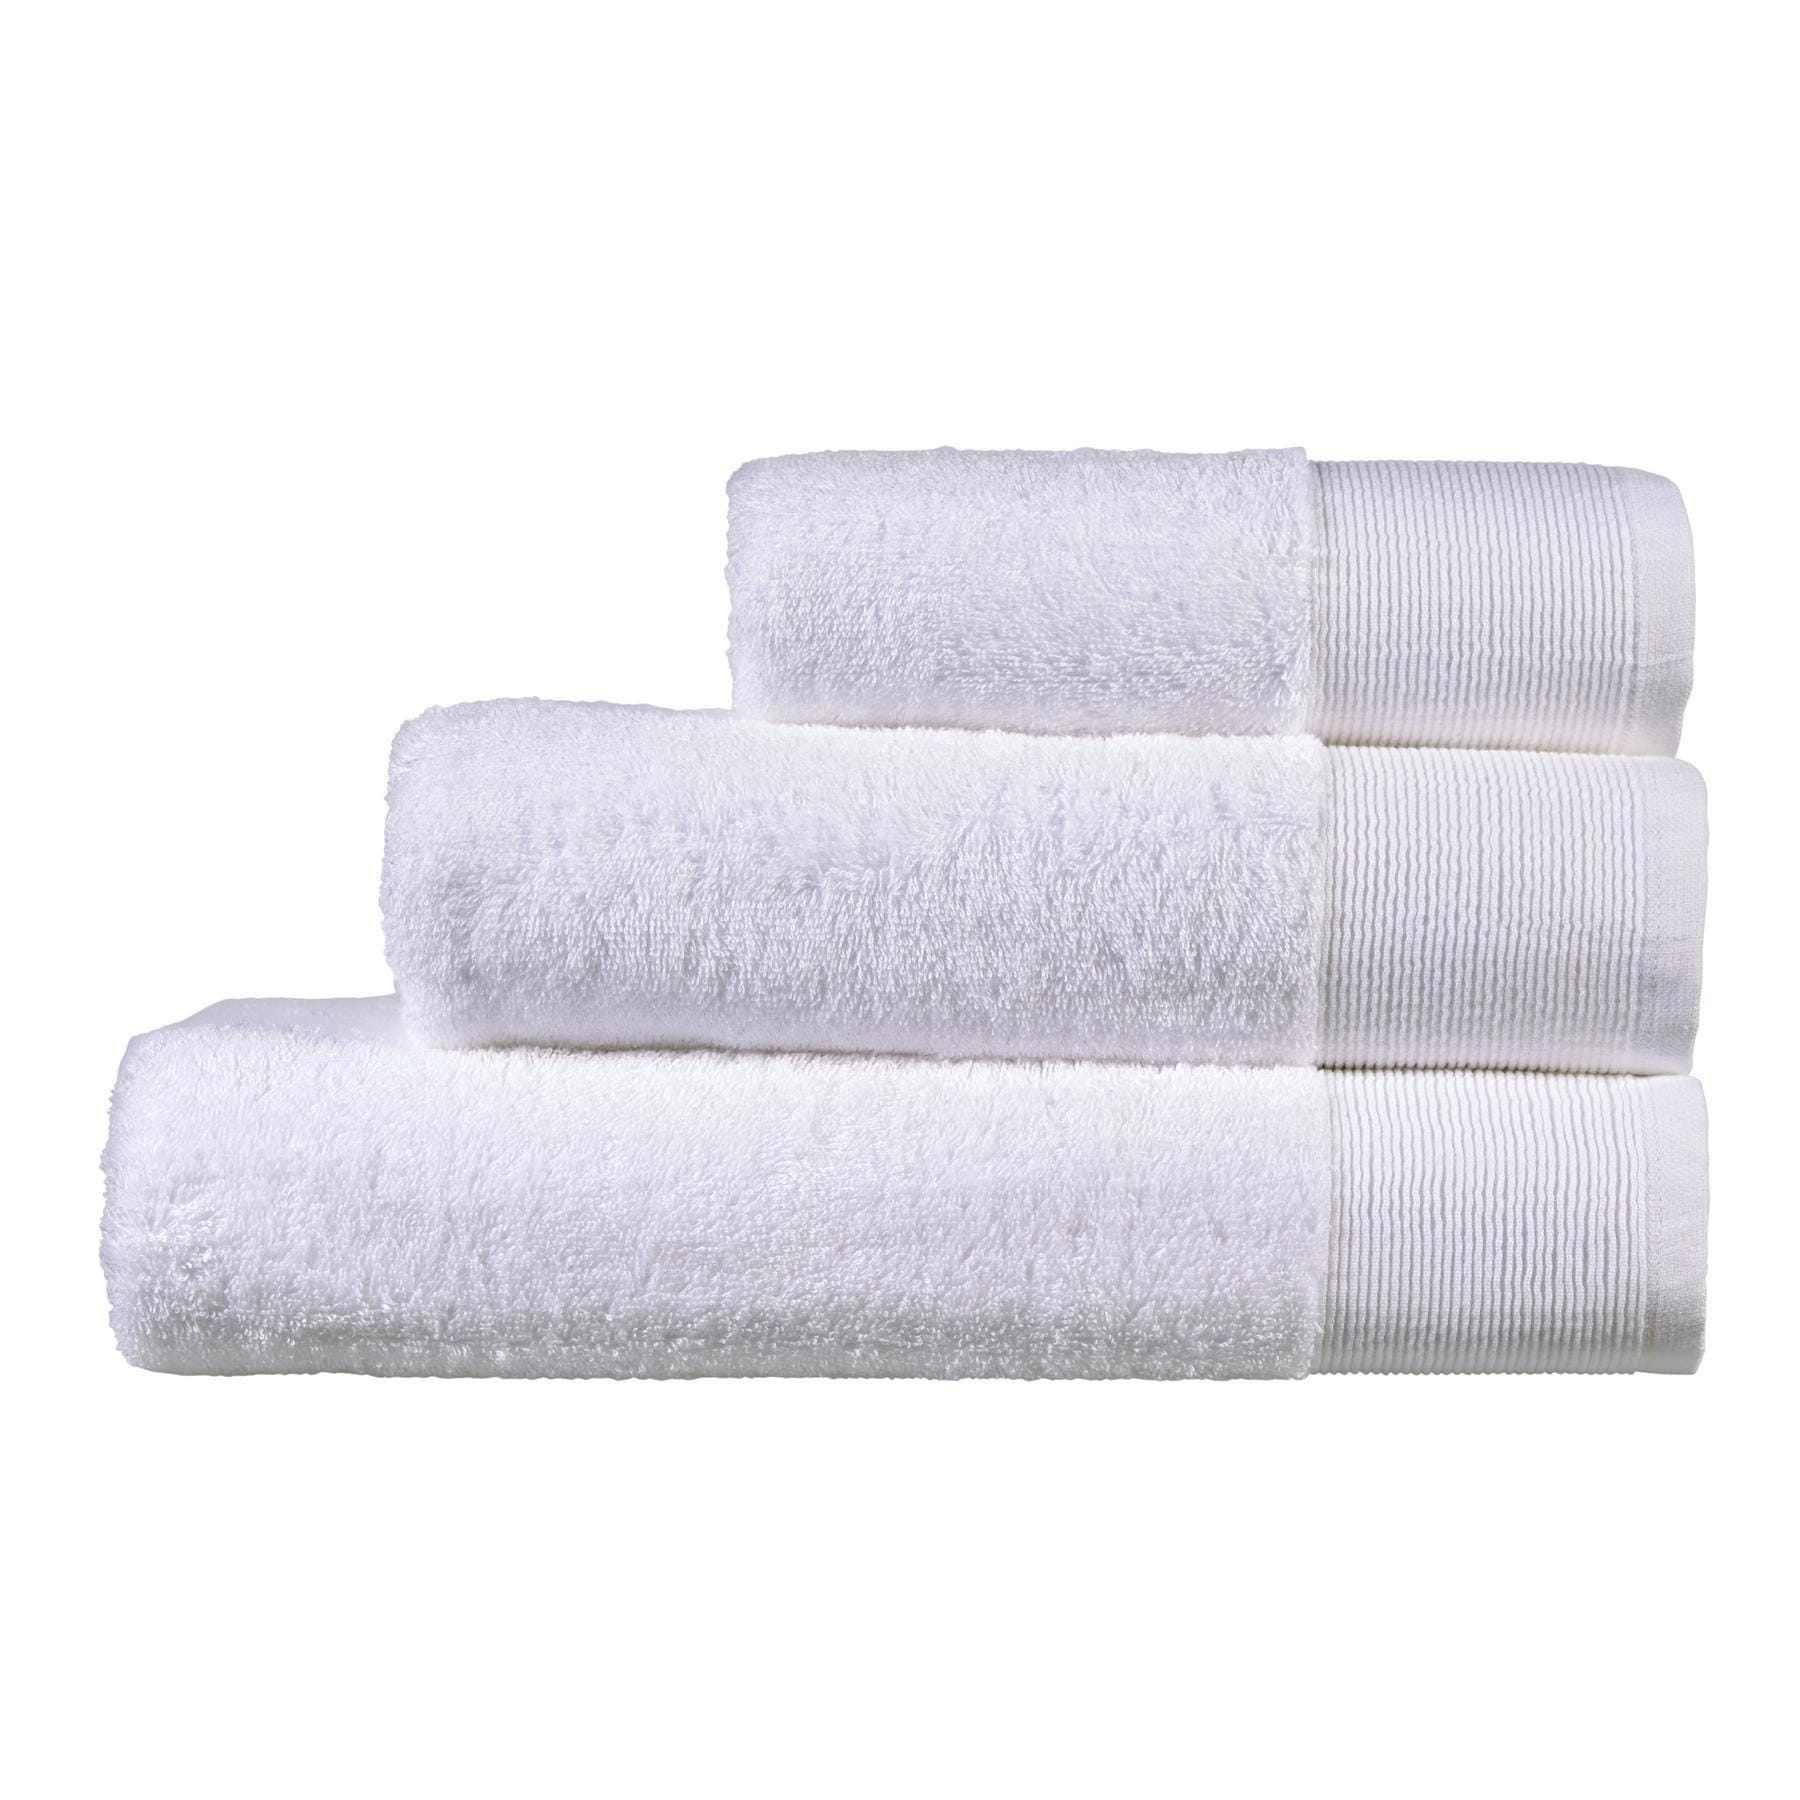 GEORGIABAGS 100% Cotton Velour Fingertip Towel Set (3 Pack), Bamboo and  Cotton, Super Soft 11